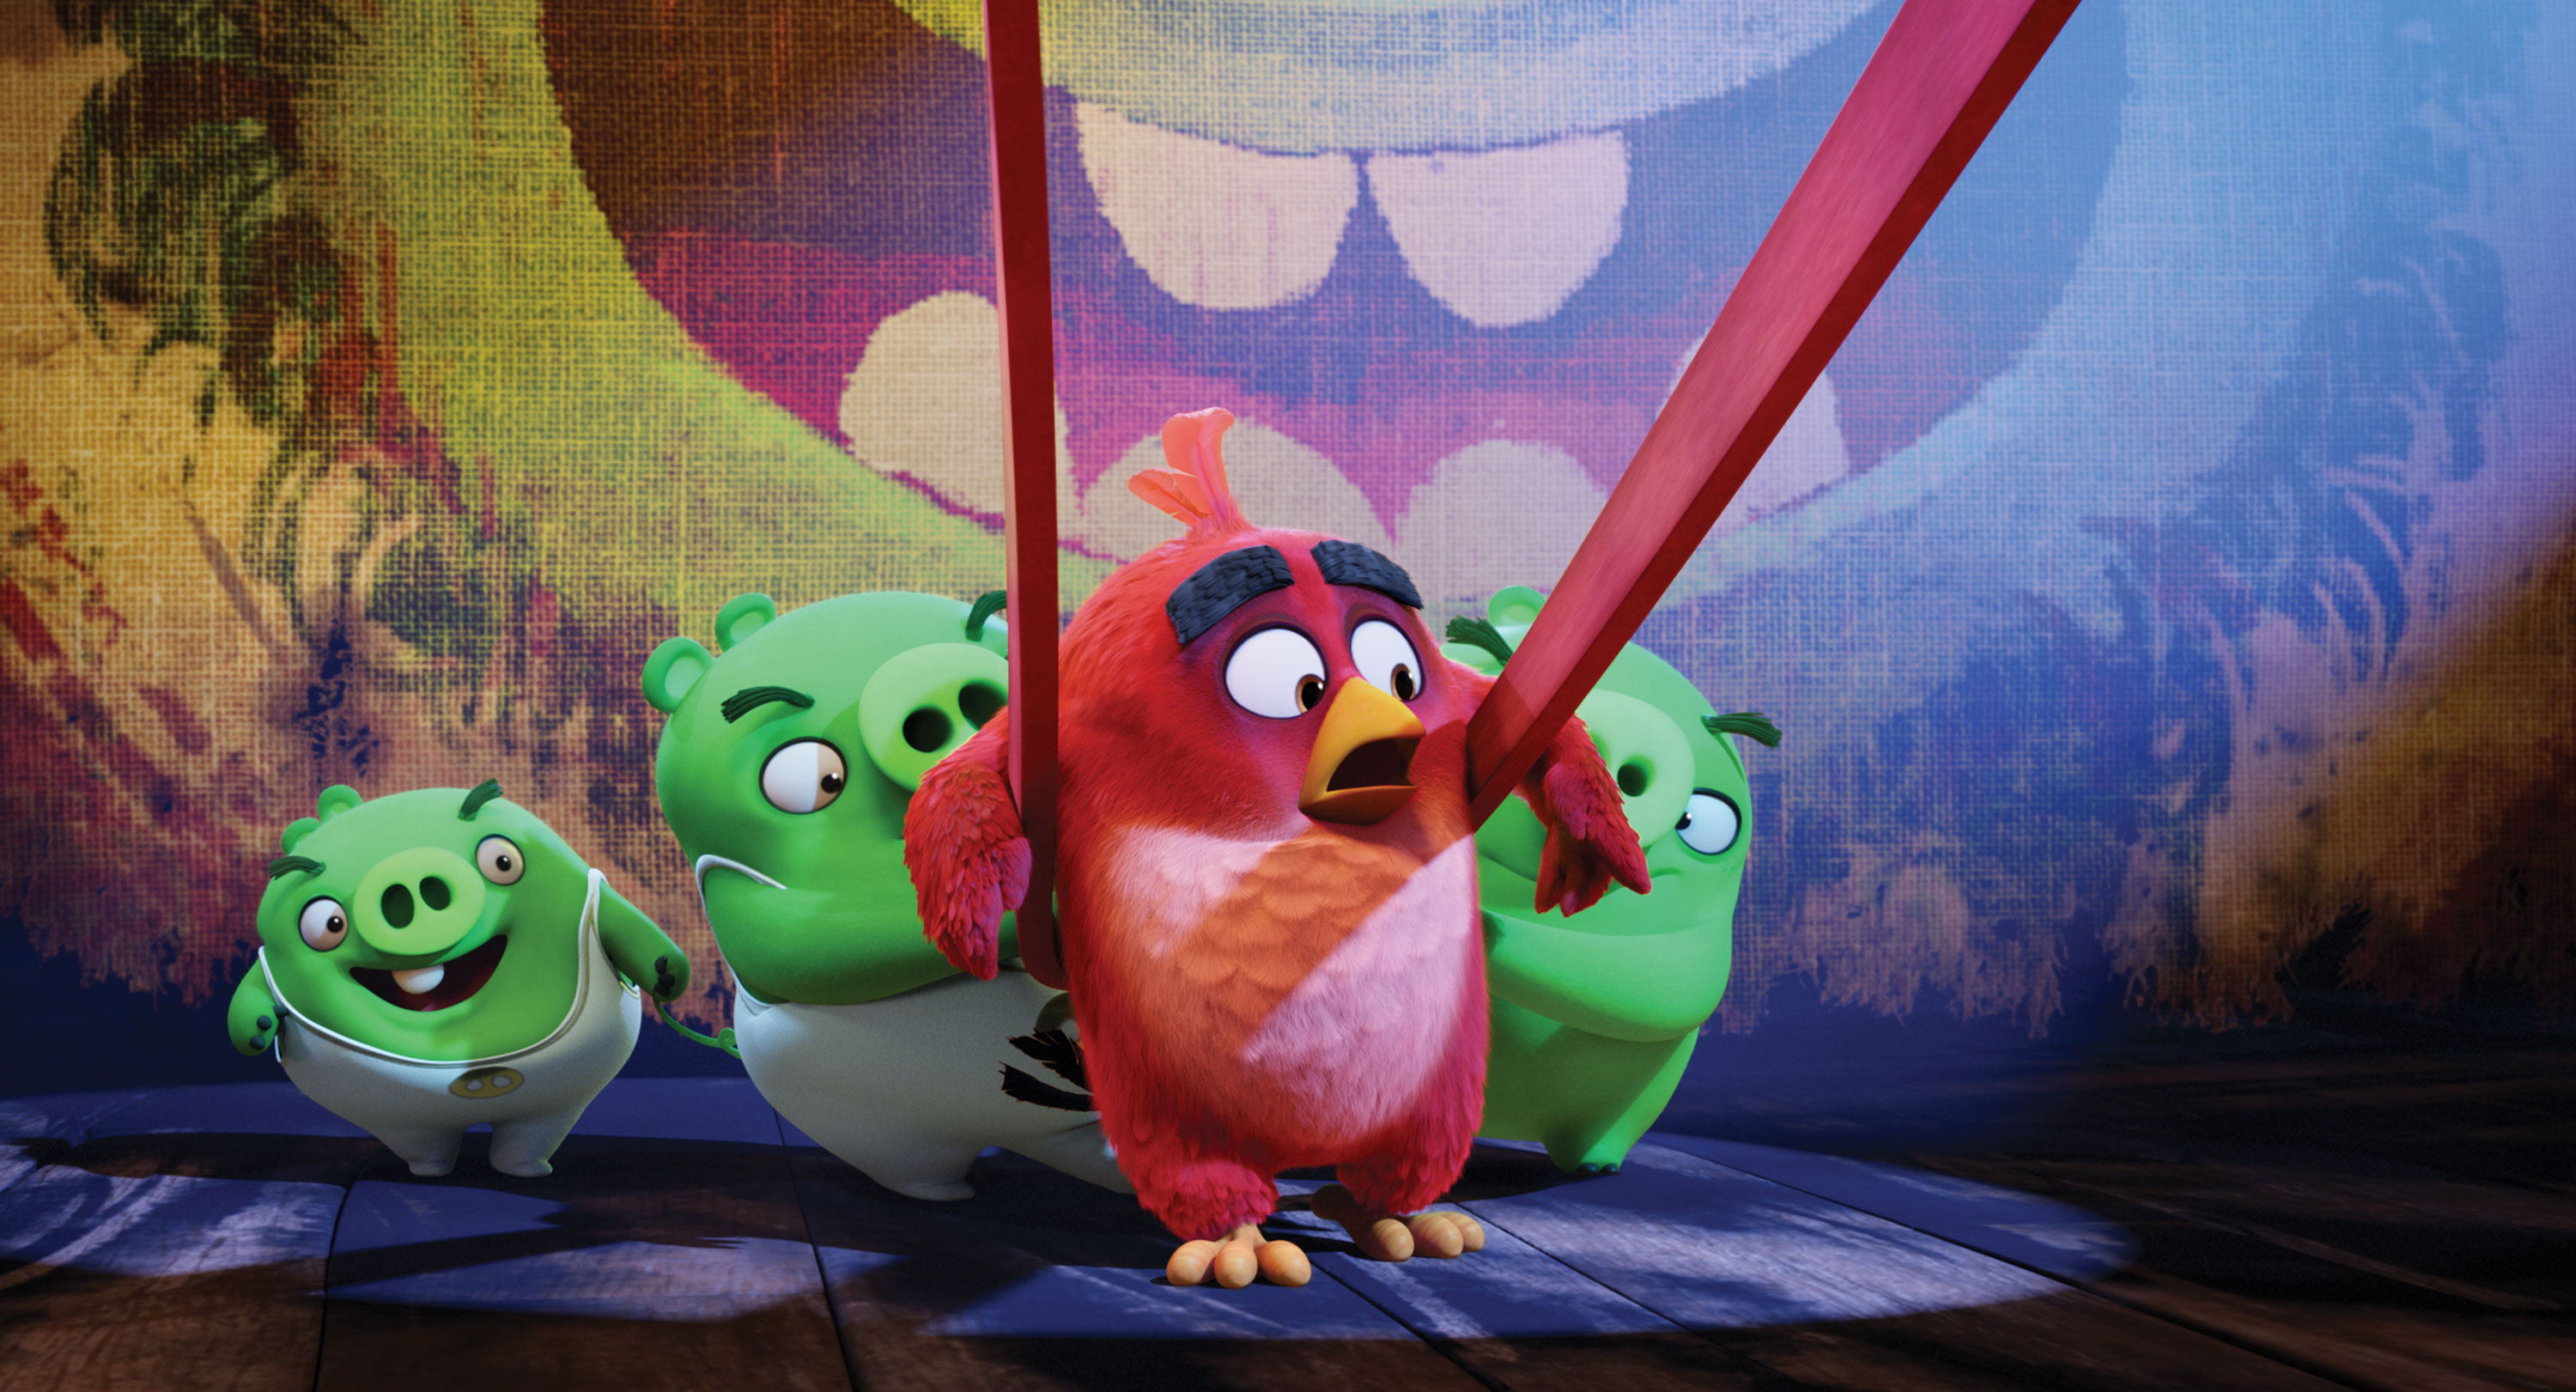 Angry Birds™ & © 2009 – 2014 Rovio Entertainment Ltd. All Rights Reserved.